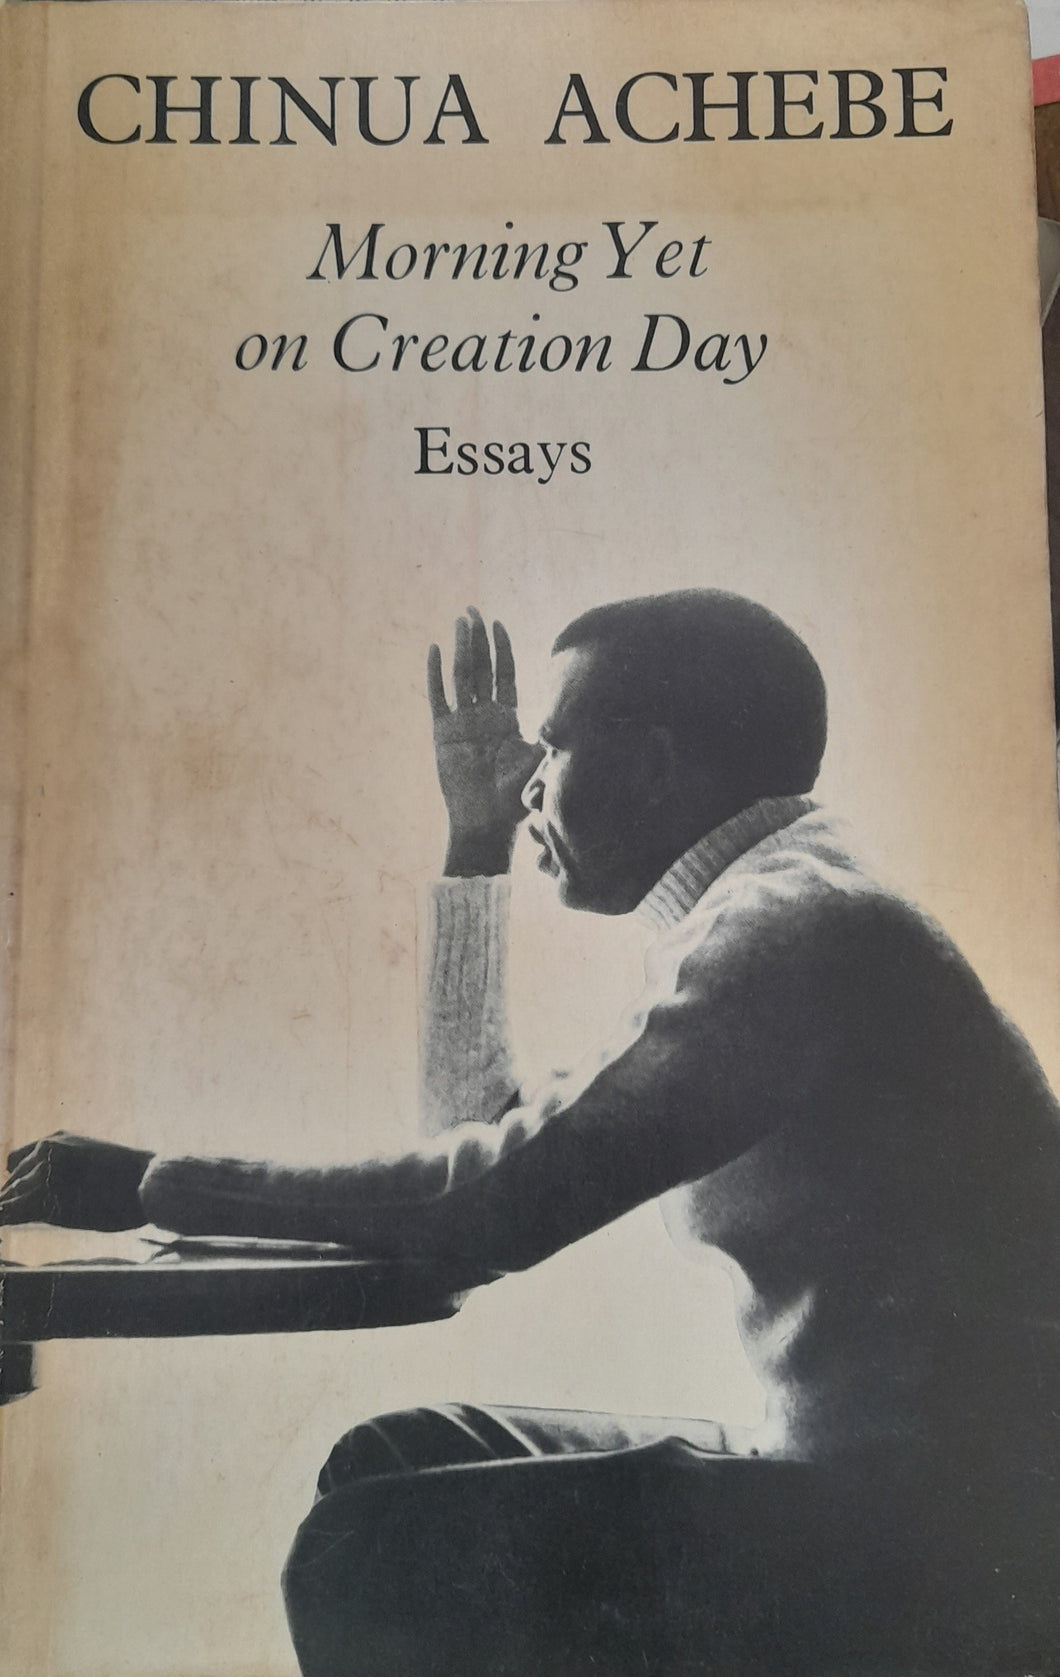 Chinua Achebe - Morning Yet on Creation Day: Essays